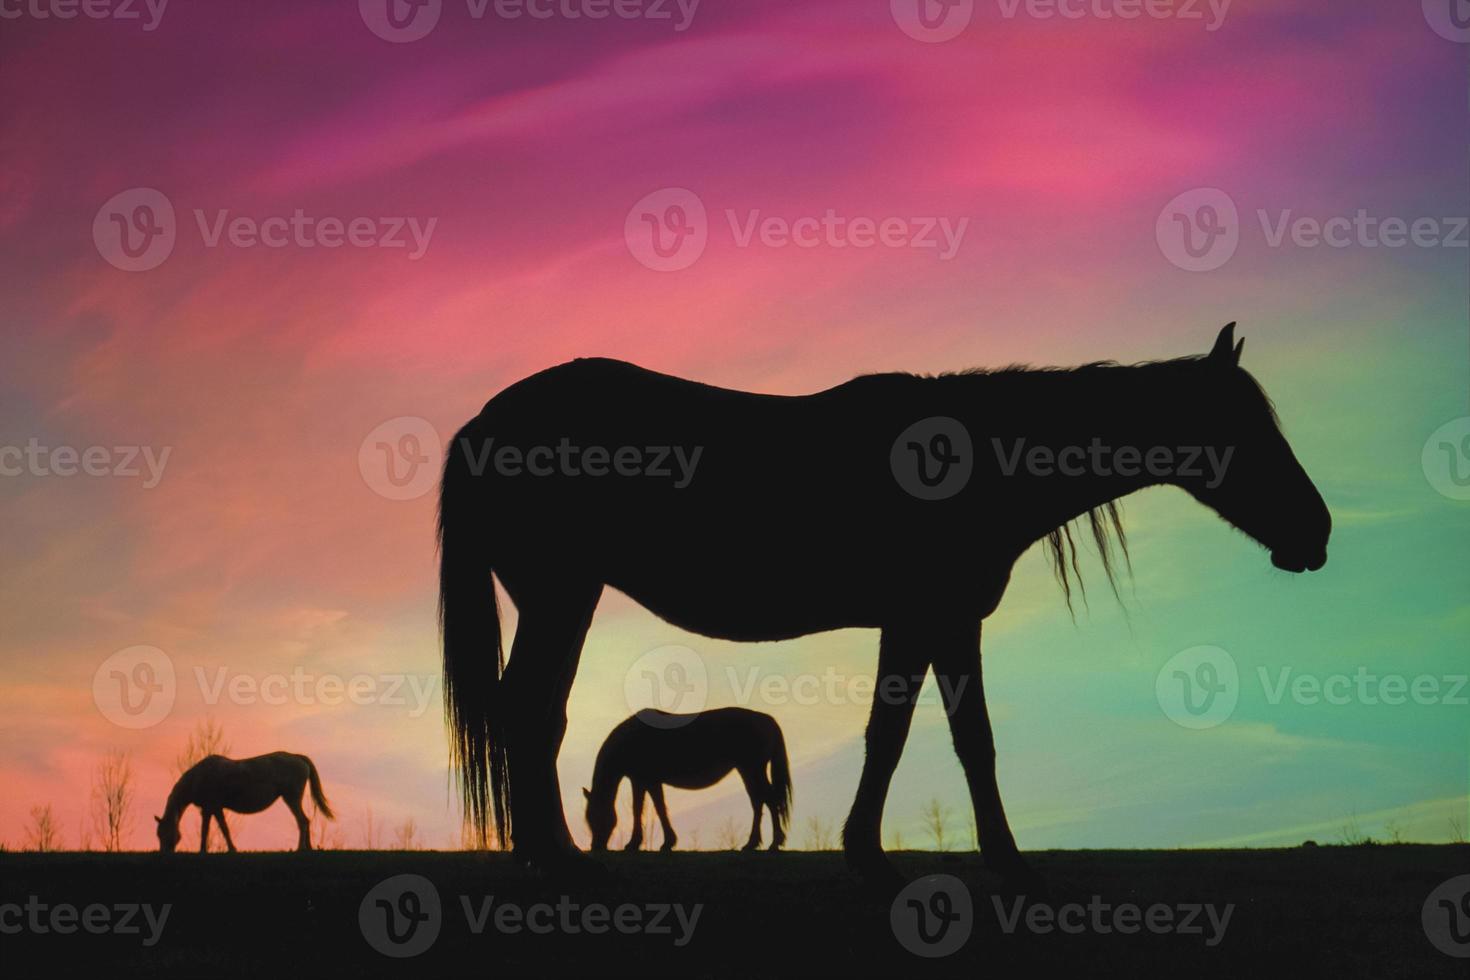 horse silhouette in the countryside and beautiful sunset background photo